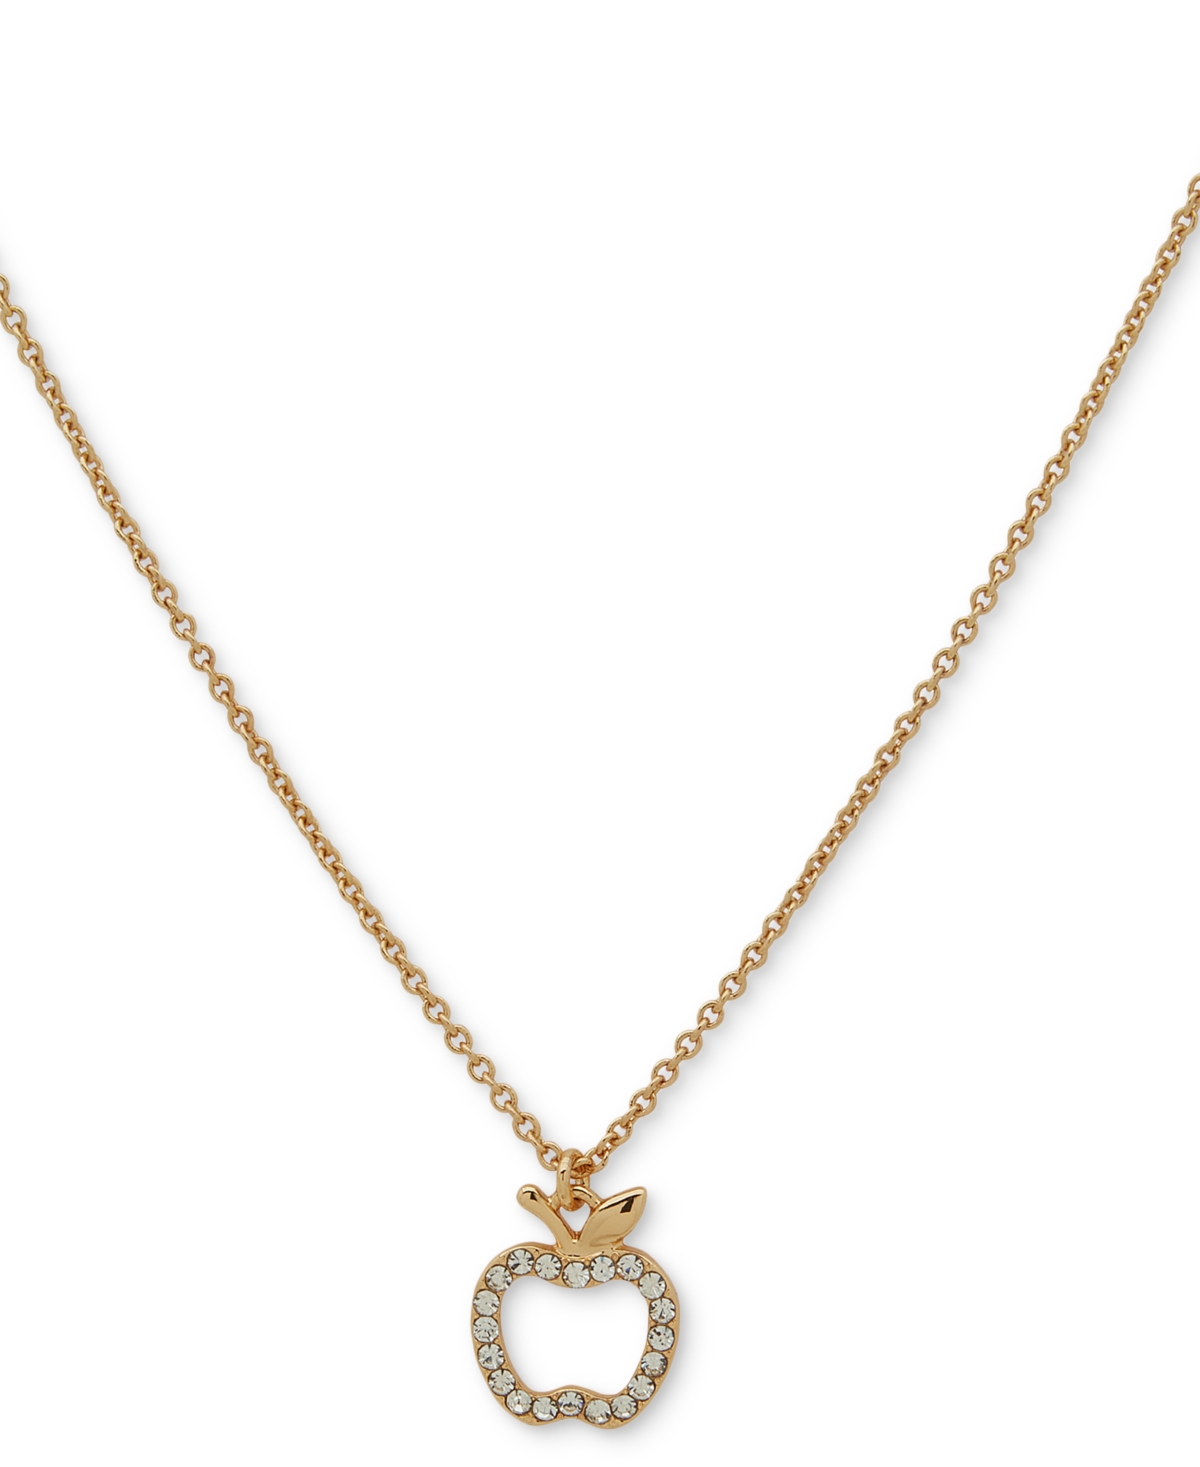 Gold-Tone Pave Crystal Apple Pendant Necklace, 16" + 3" extender - Crystal Wh